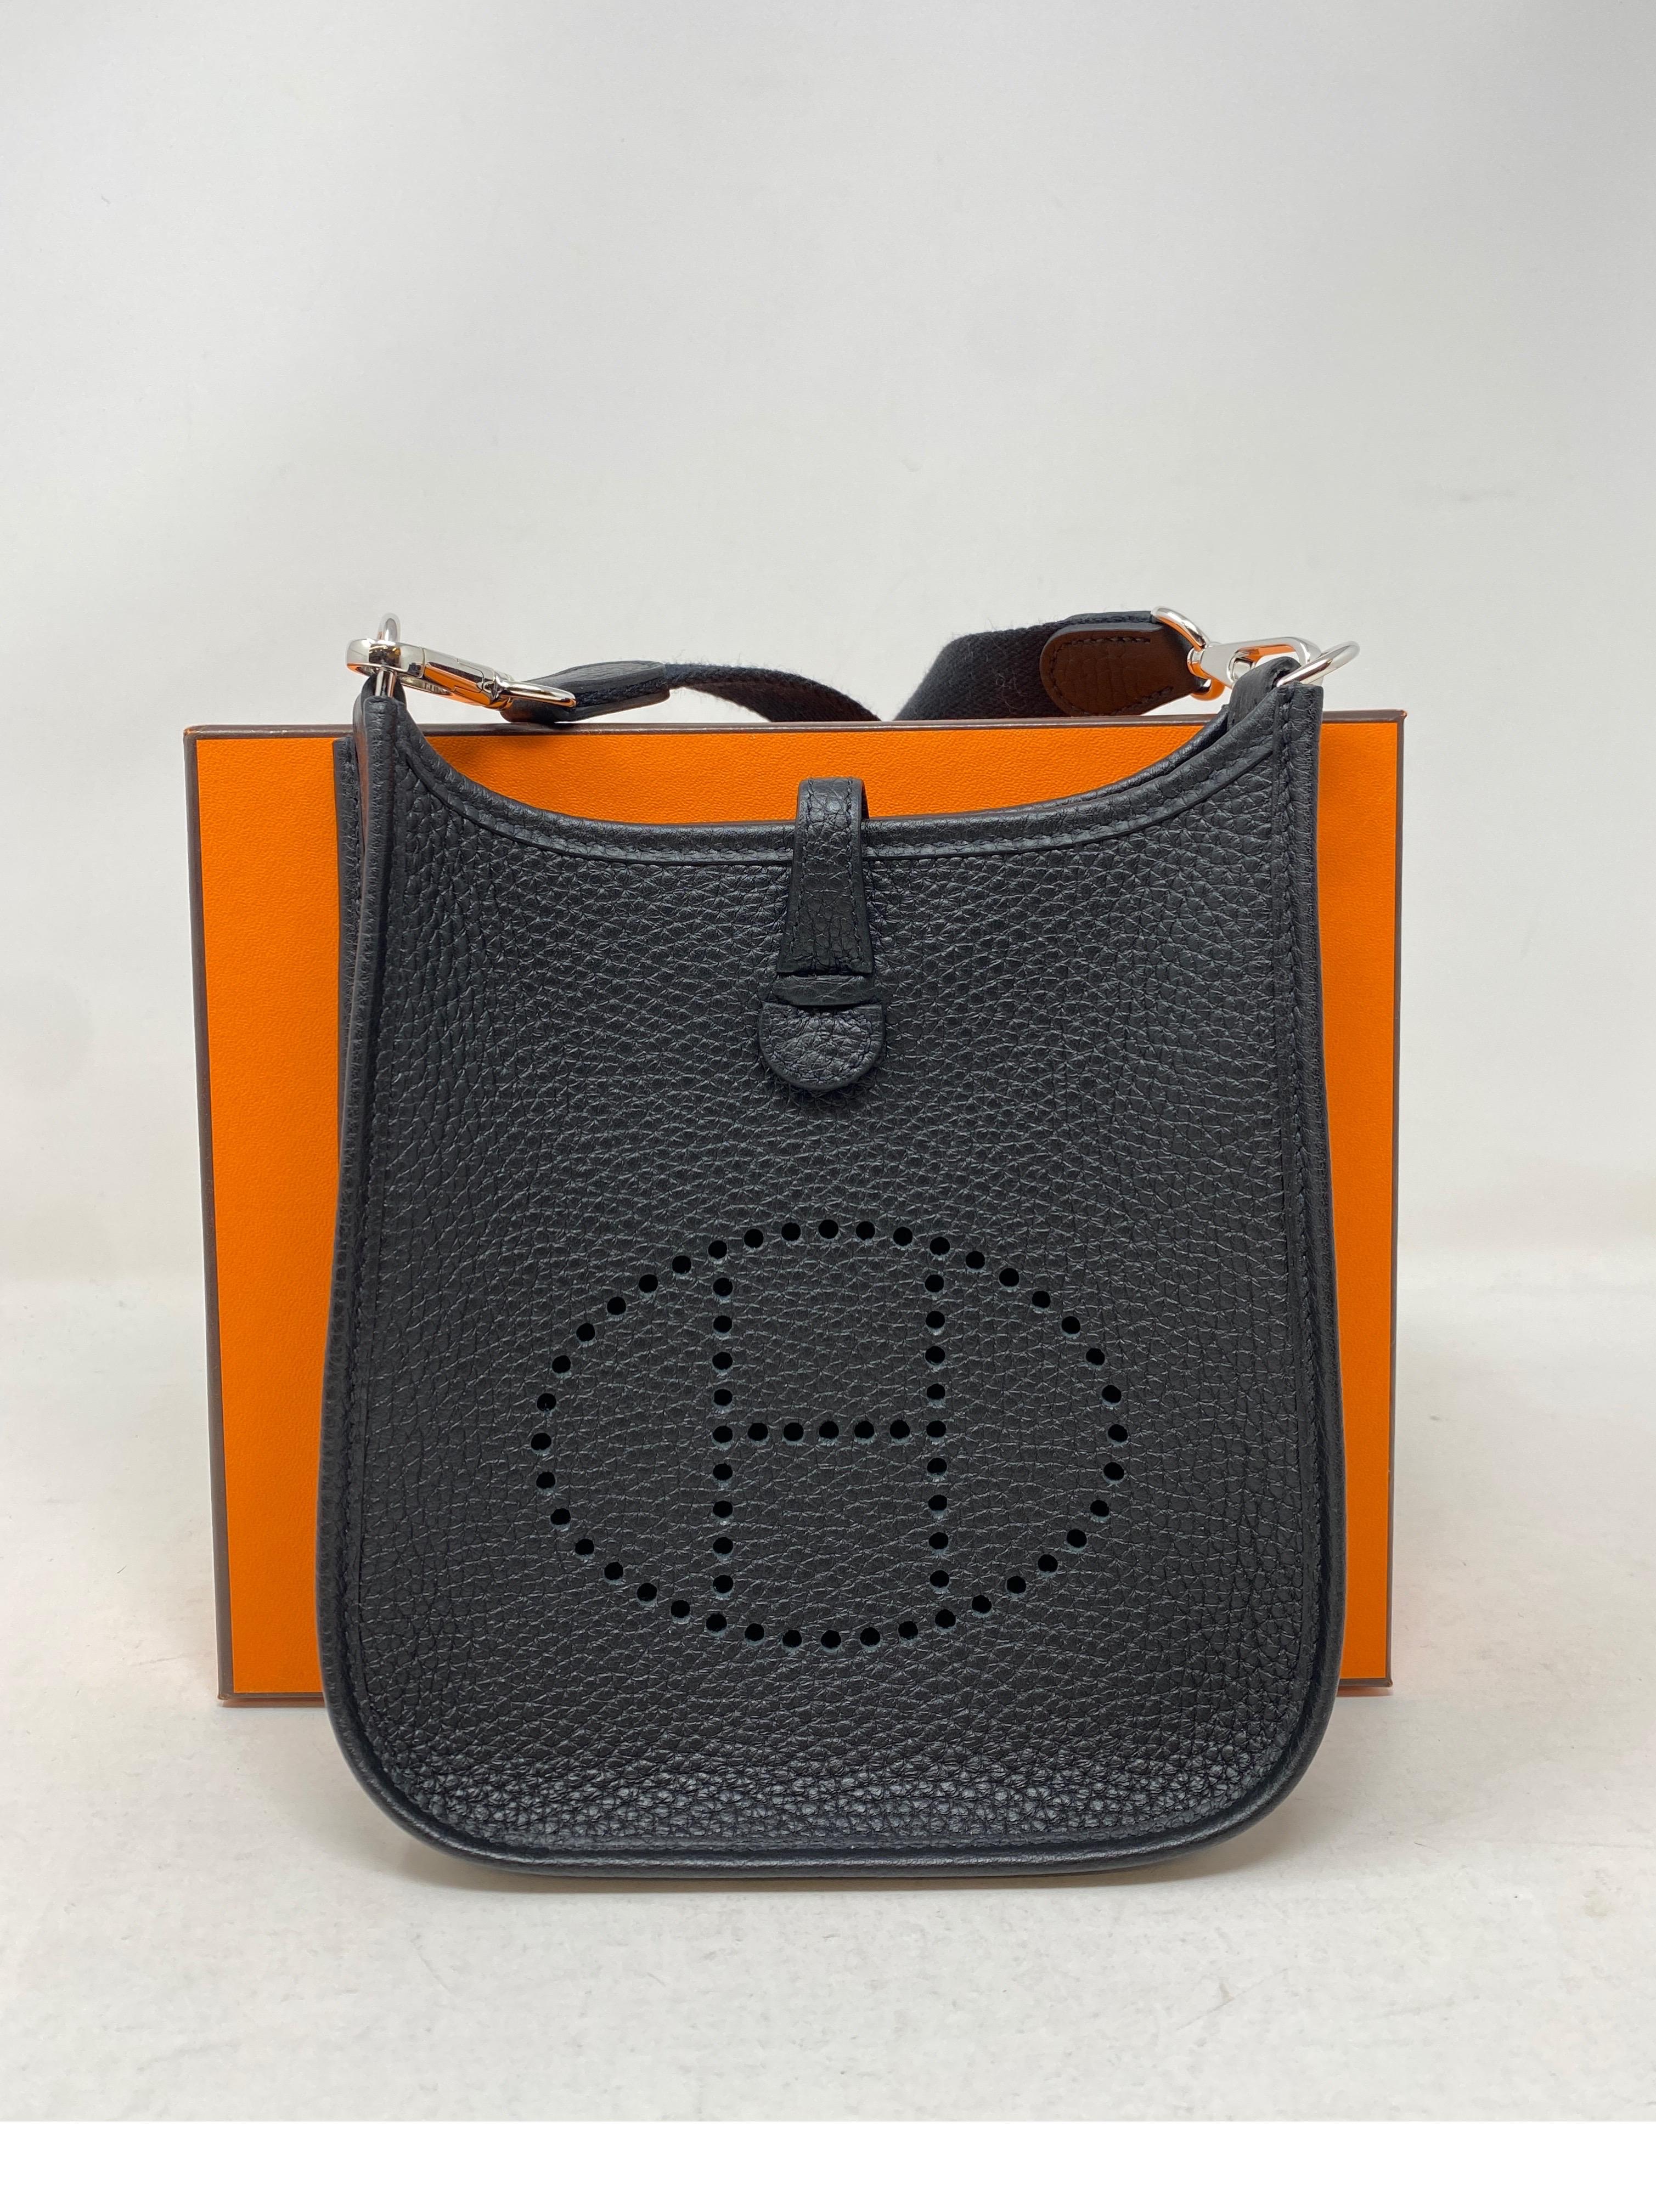 Hermes Black TPM Evelyne Bag. Beautiful mini bag by Hermes. Brand new with box. Guaranteed authentic. 